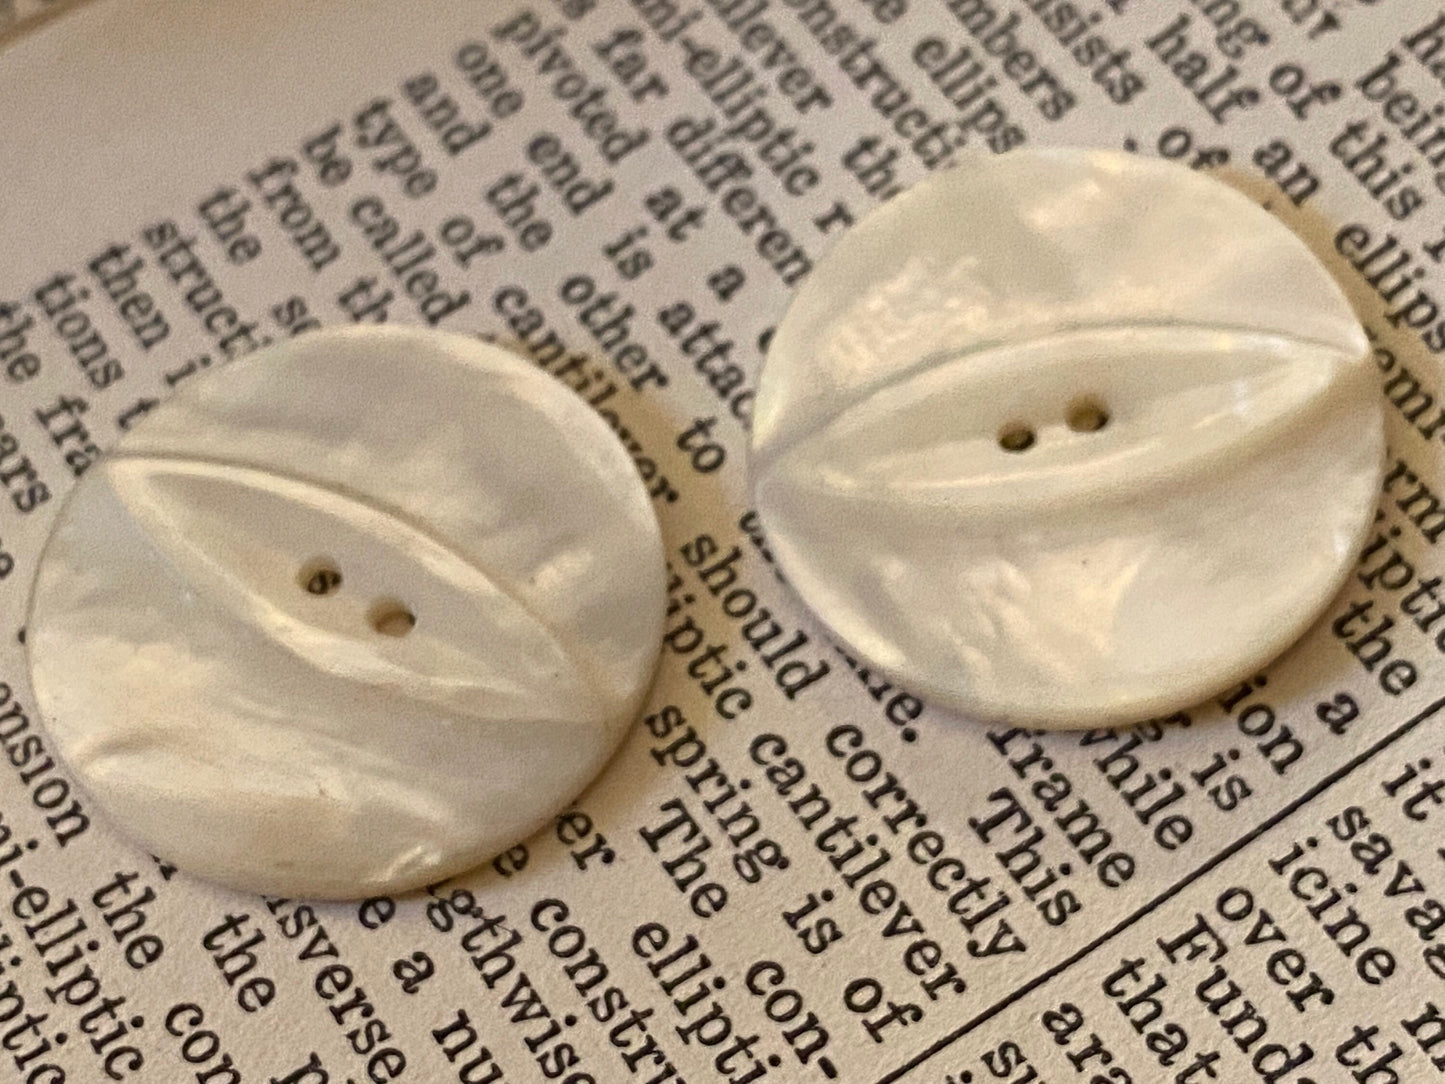 Two abalone shell buttons: 1 1/8", hand carved, raised relief cat eye, secondhand sourced, carefully matched pair